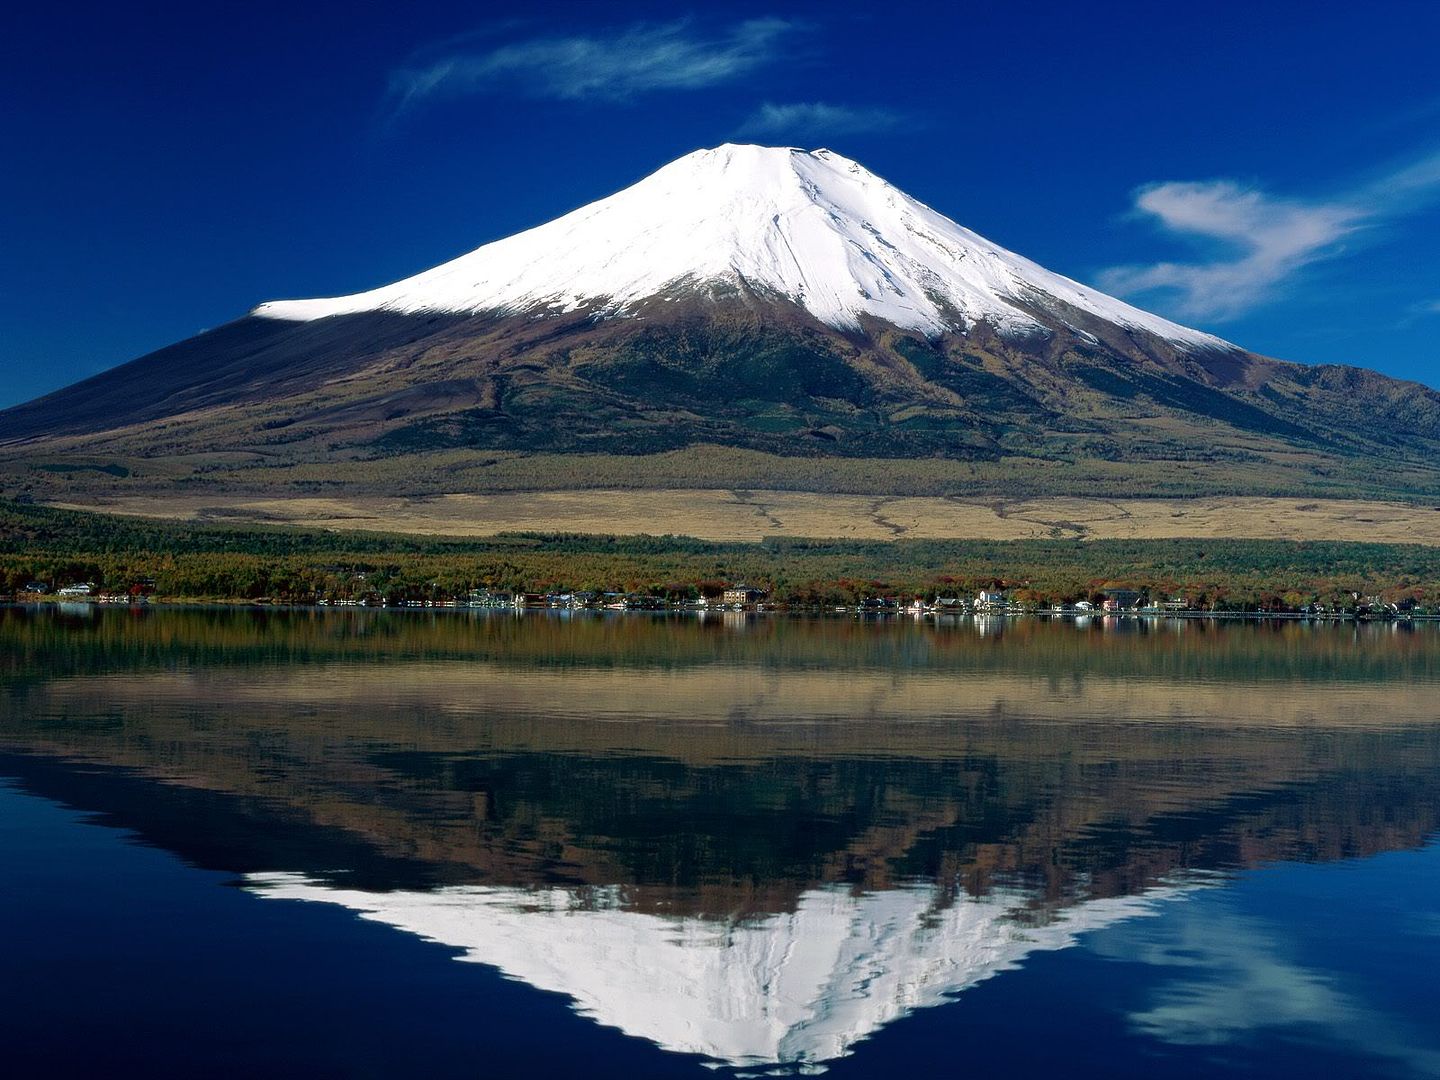 Mount Fuji with Reflection